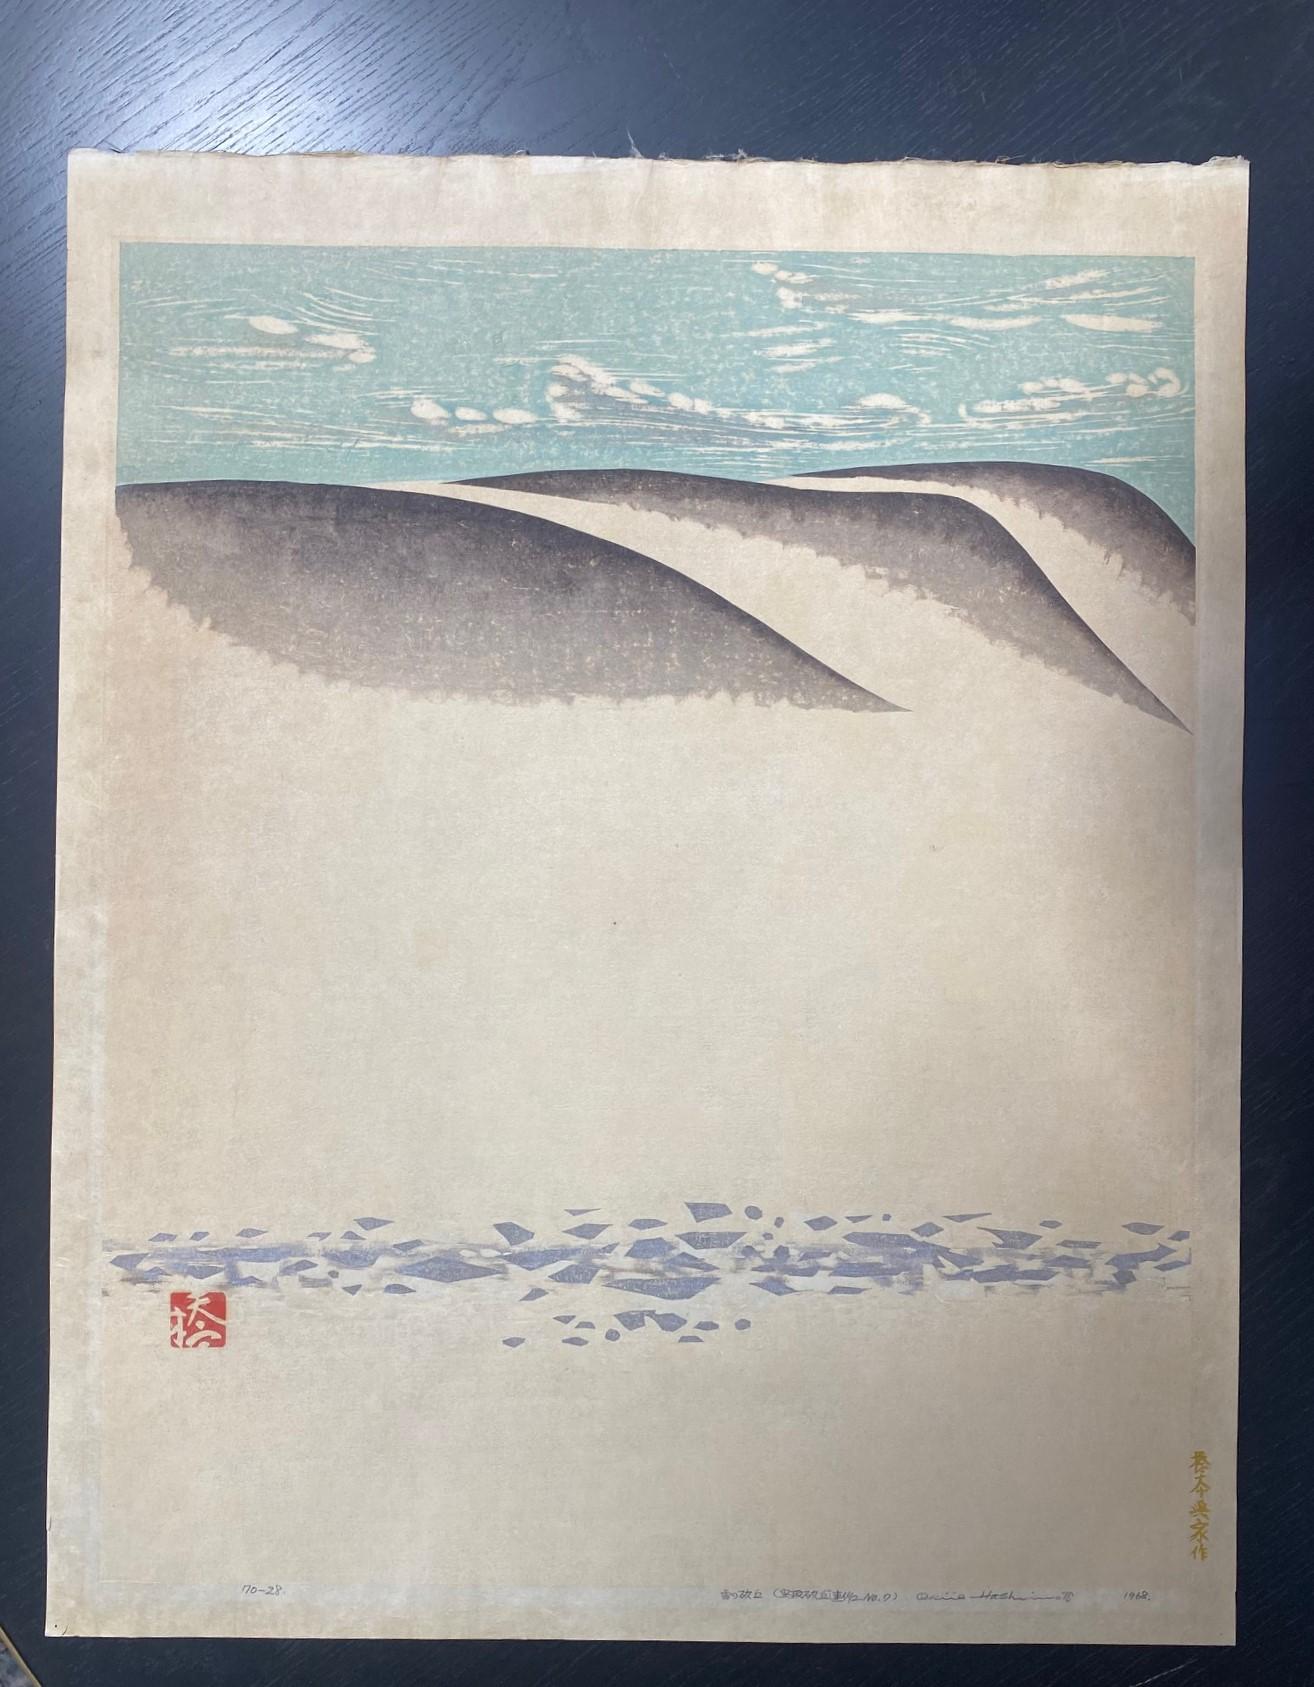 A wonderfully composed and subtly colored woodblock print by renowned Japanese woodblock artist Okiie Hashimoto (1899-1993) titled 